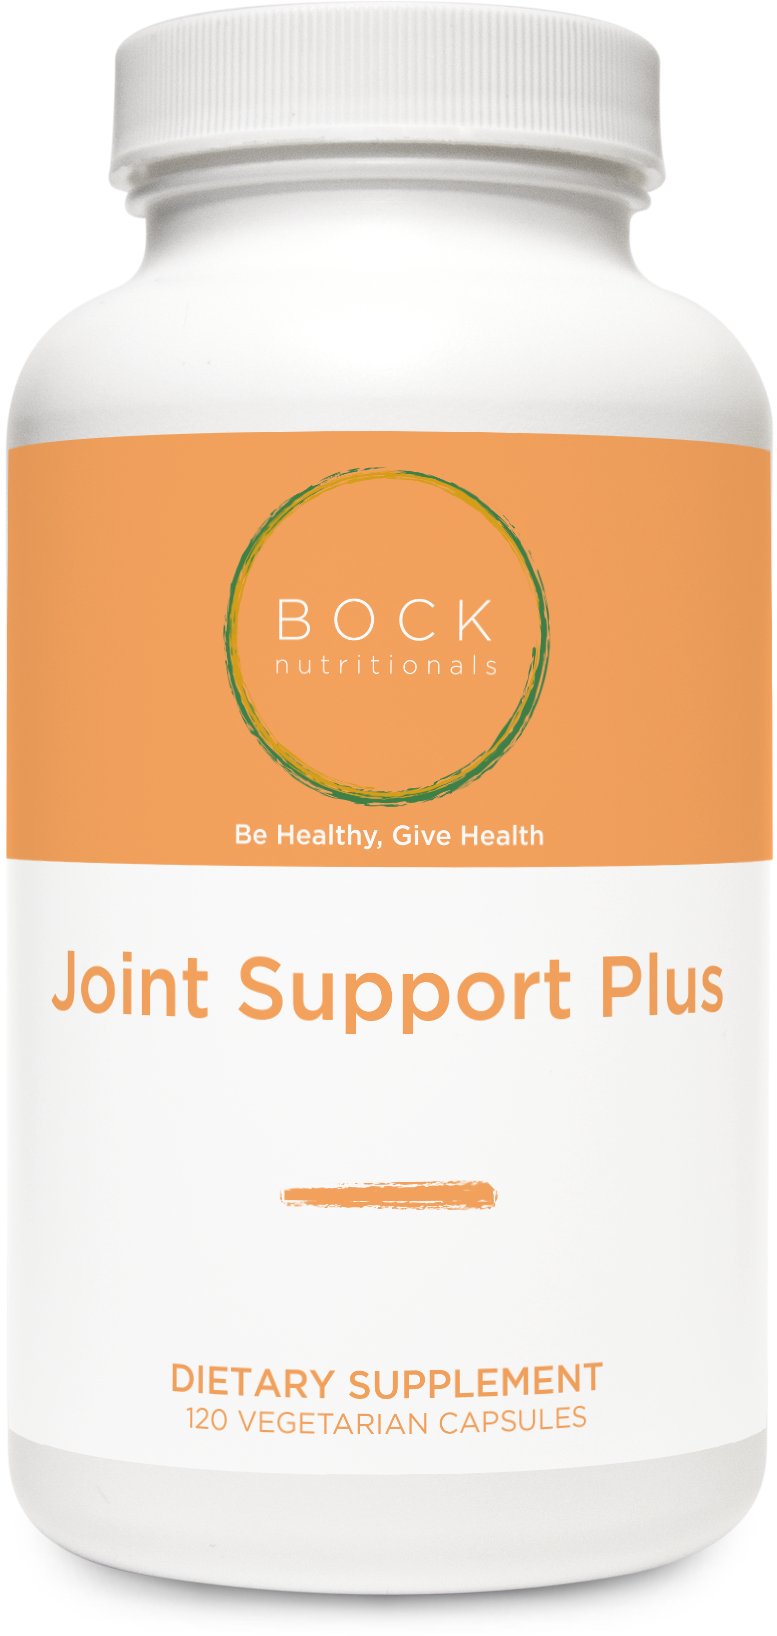 Joint Support Plus